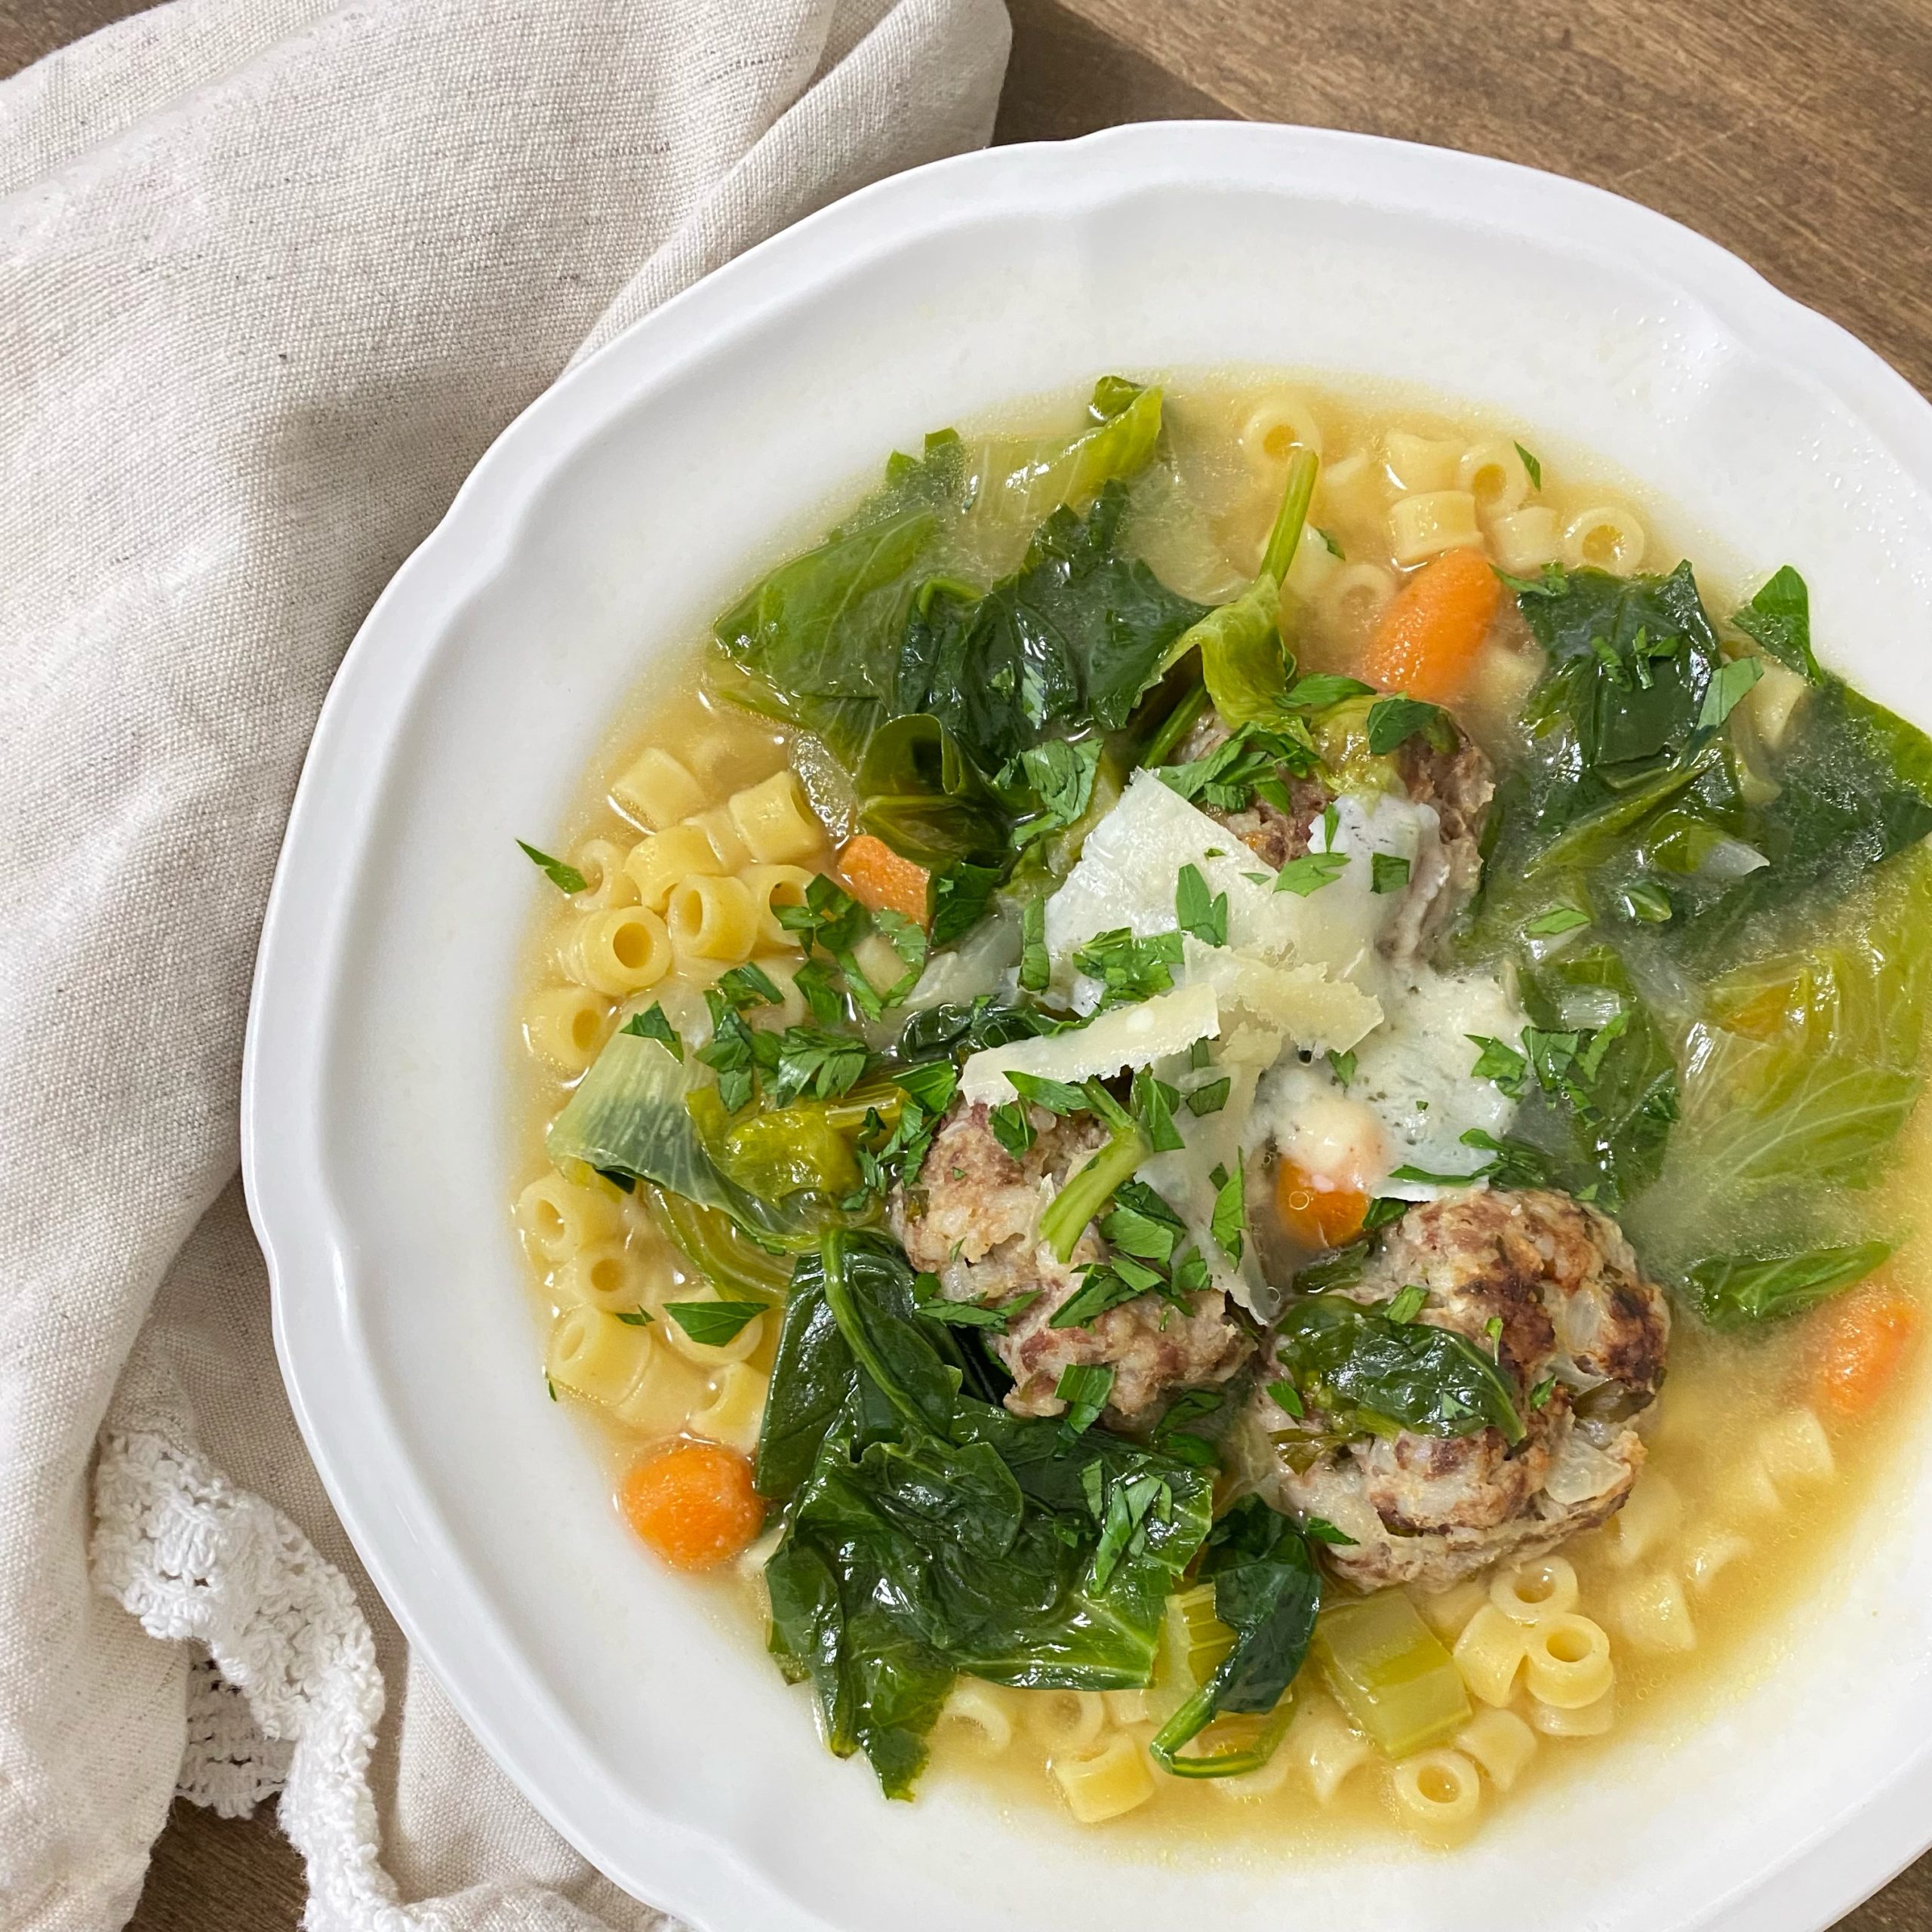 Italian Wedding Soup in a white bowl with a napkin on the side.